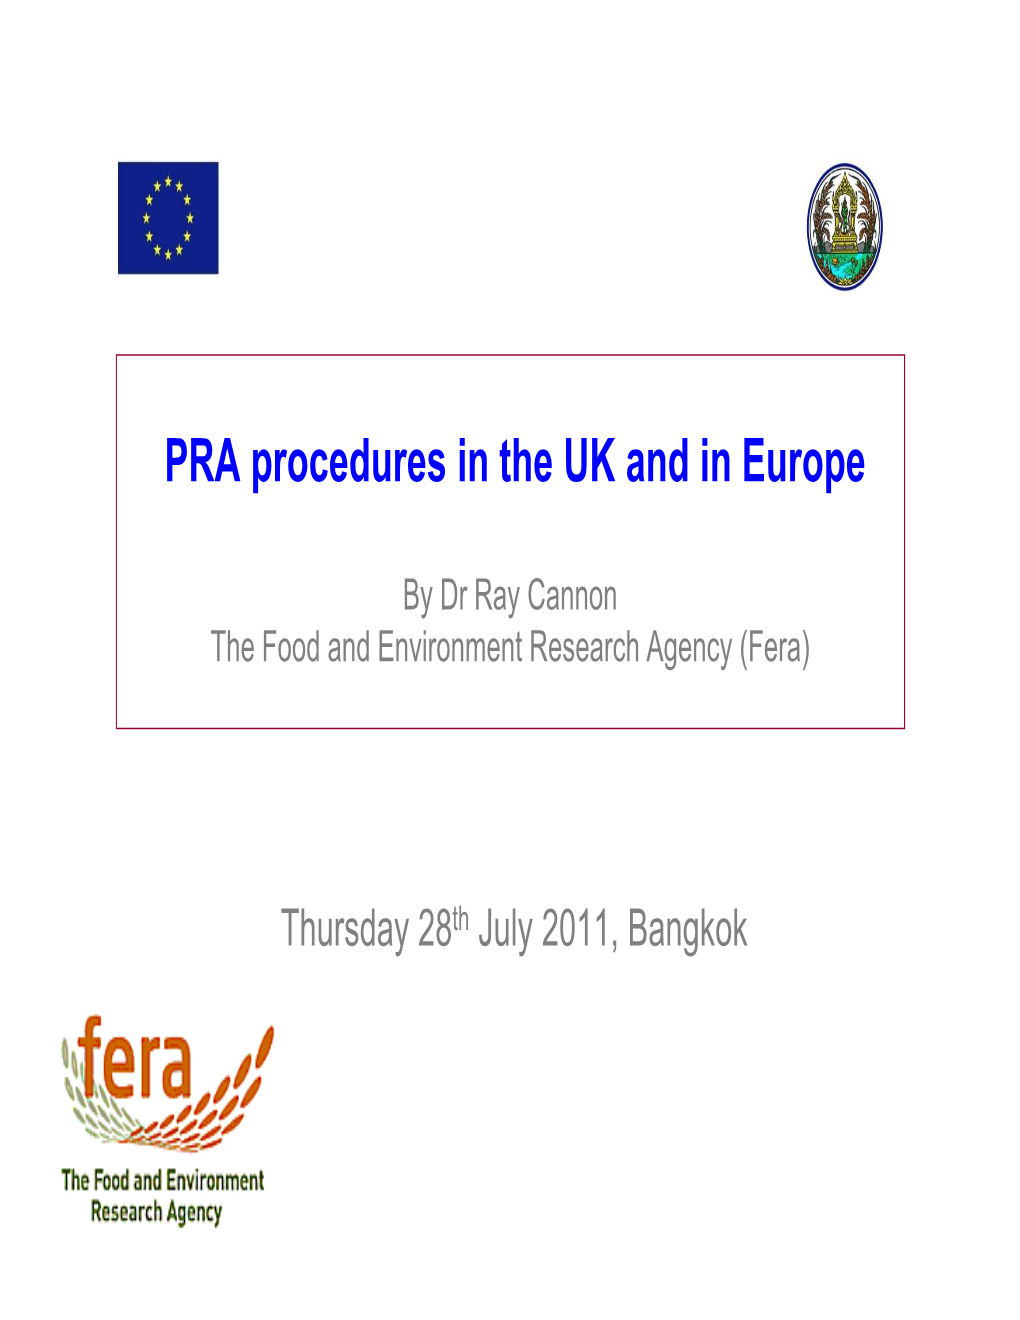 PRA Procedures in the UK and in Europe